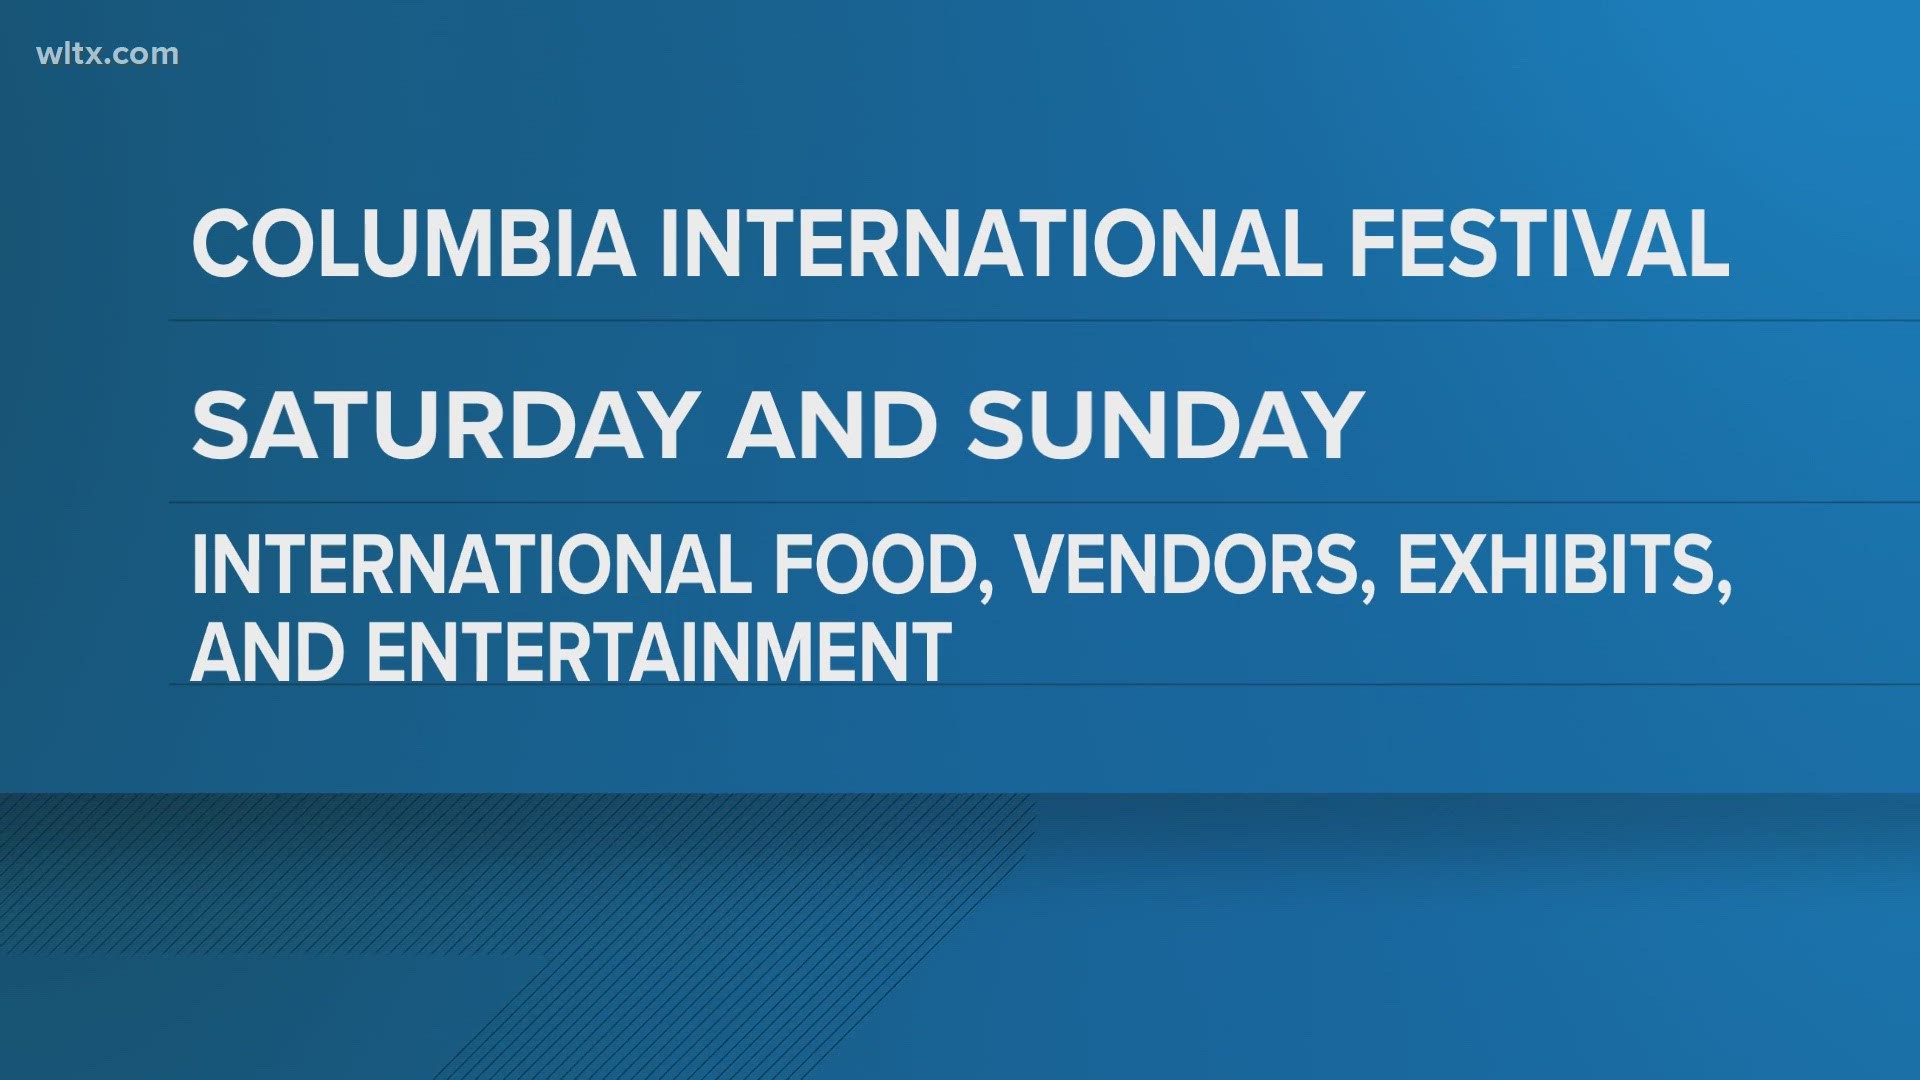 More than 95 cultures are represented and the event will be held at the SC State Fairgrounds.